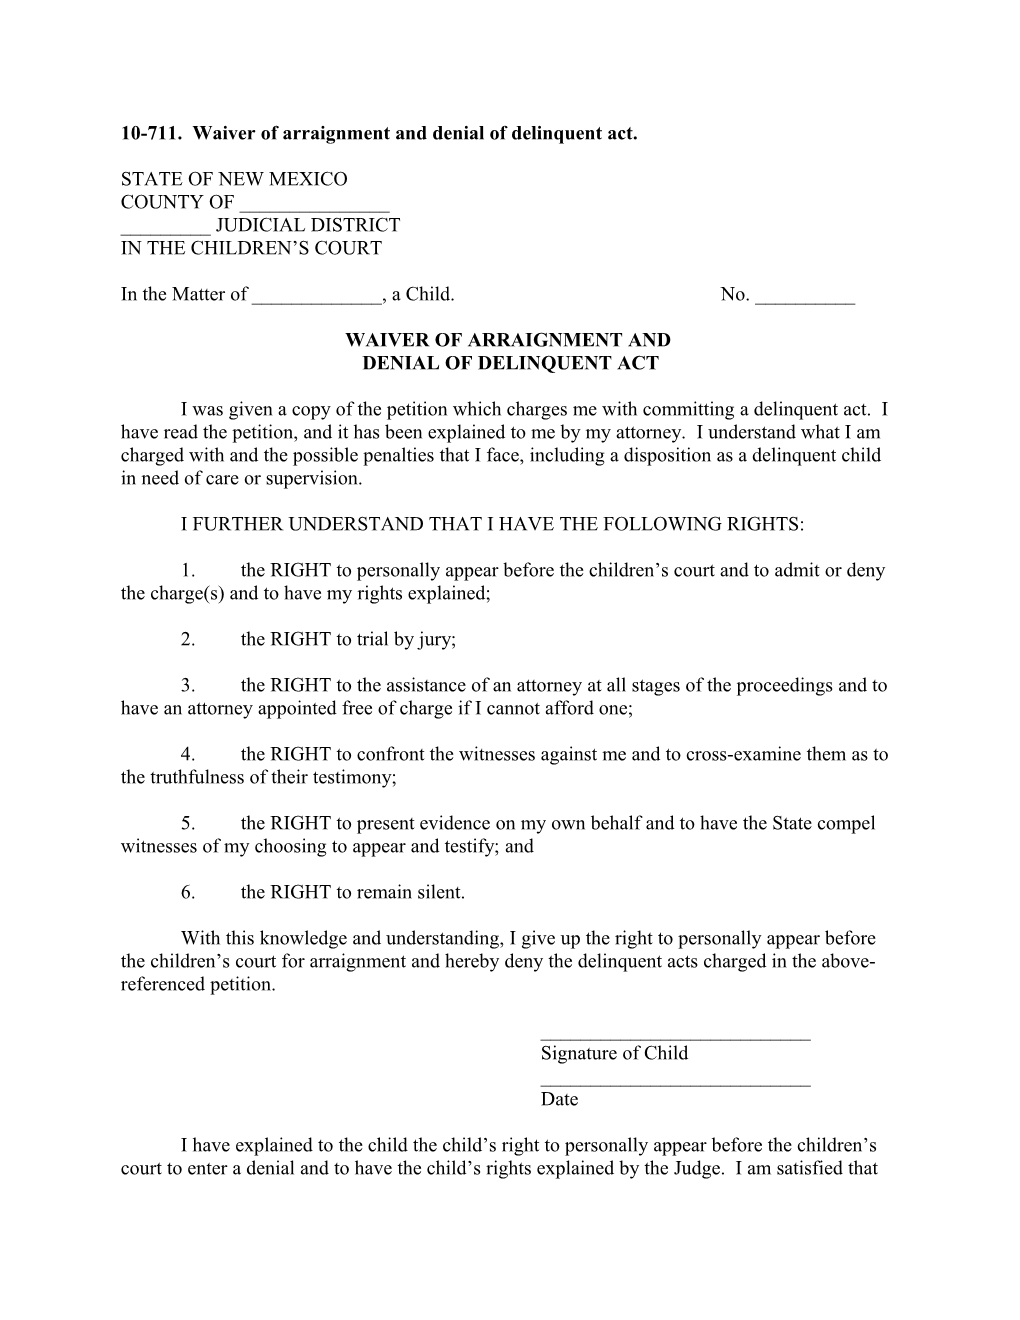 10-711. Waiver of Arraignment and Denial of Delinquent Act